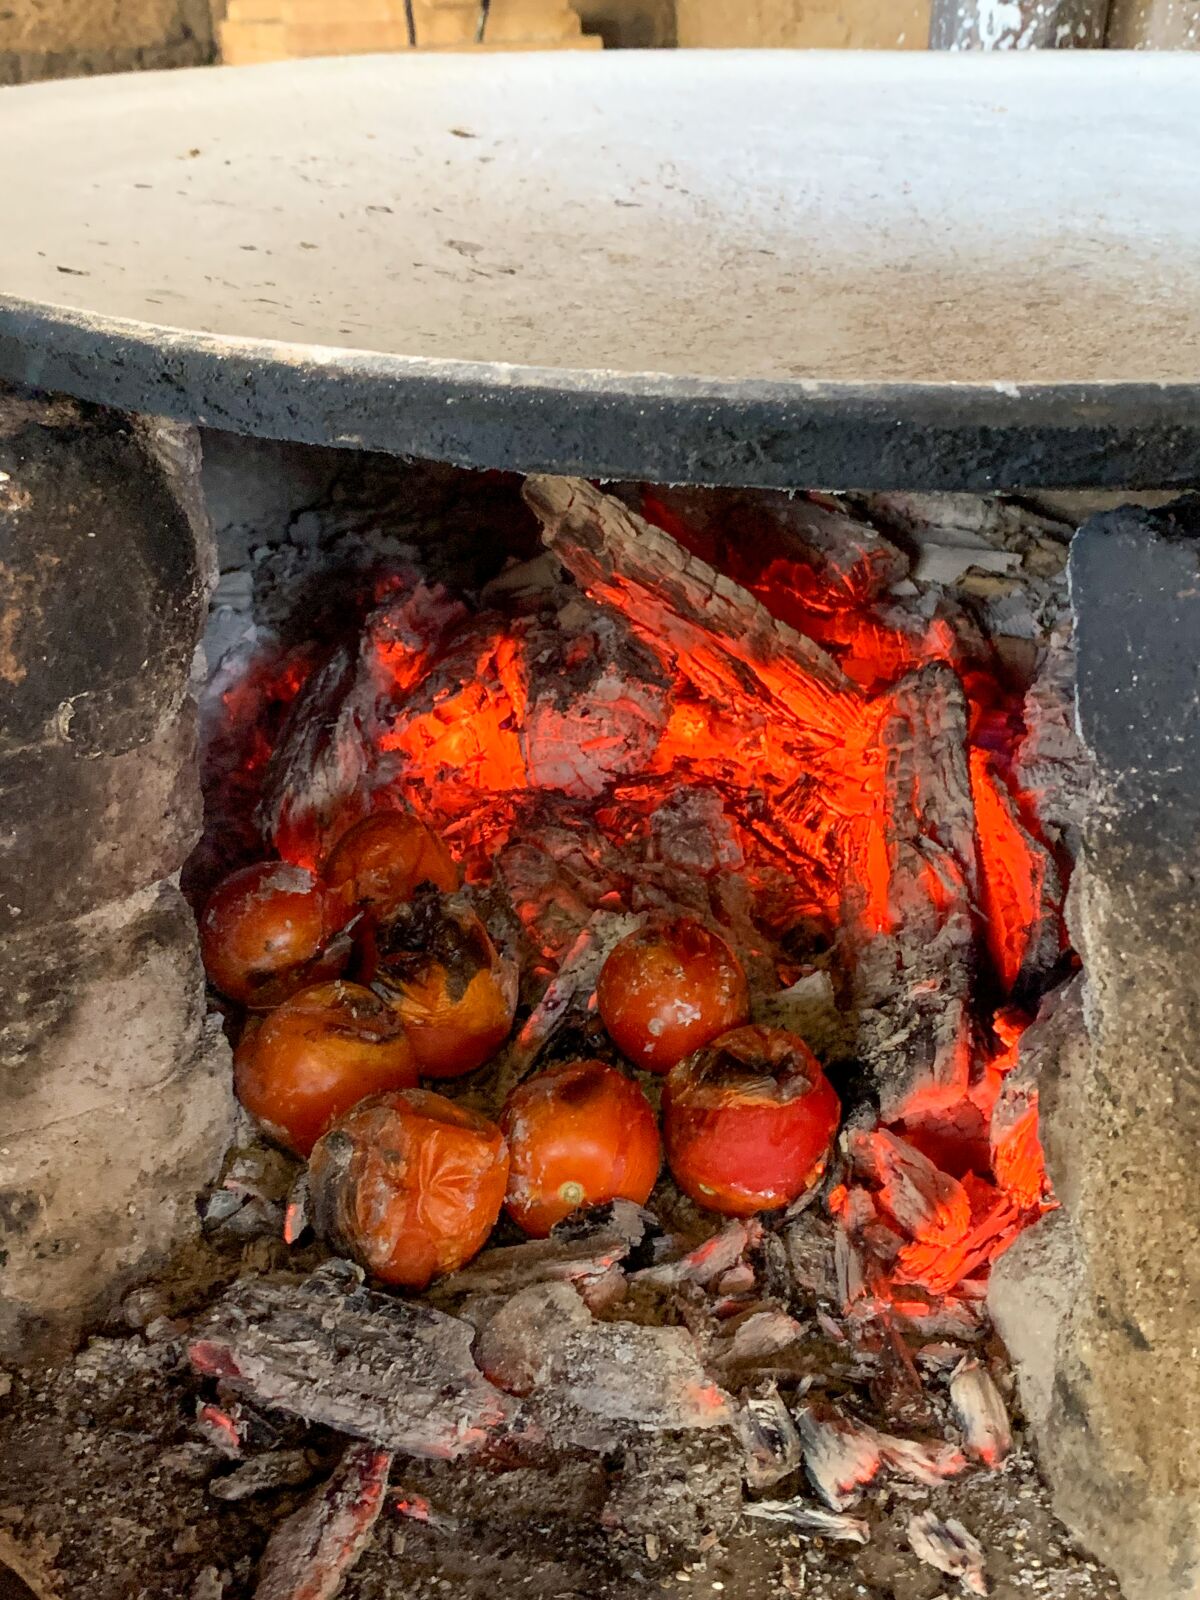 Tomatoes for the mole roast in the coals below the comal.